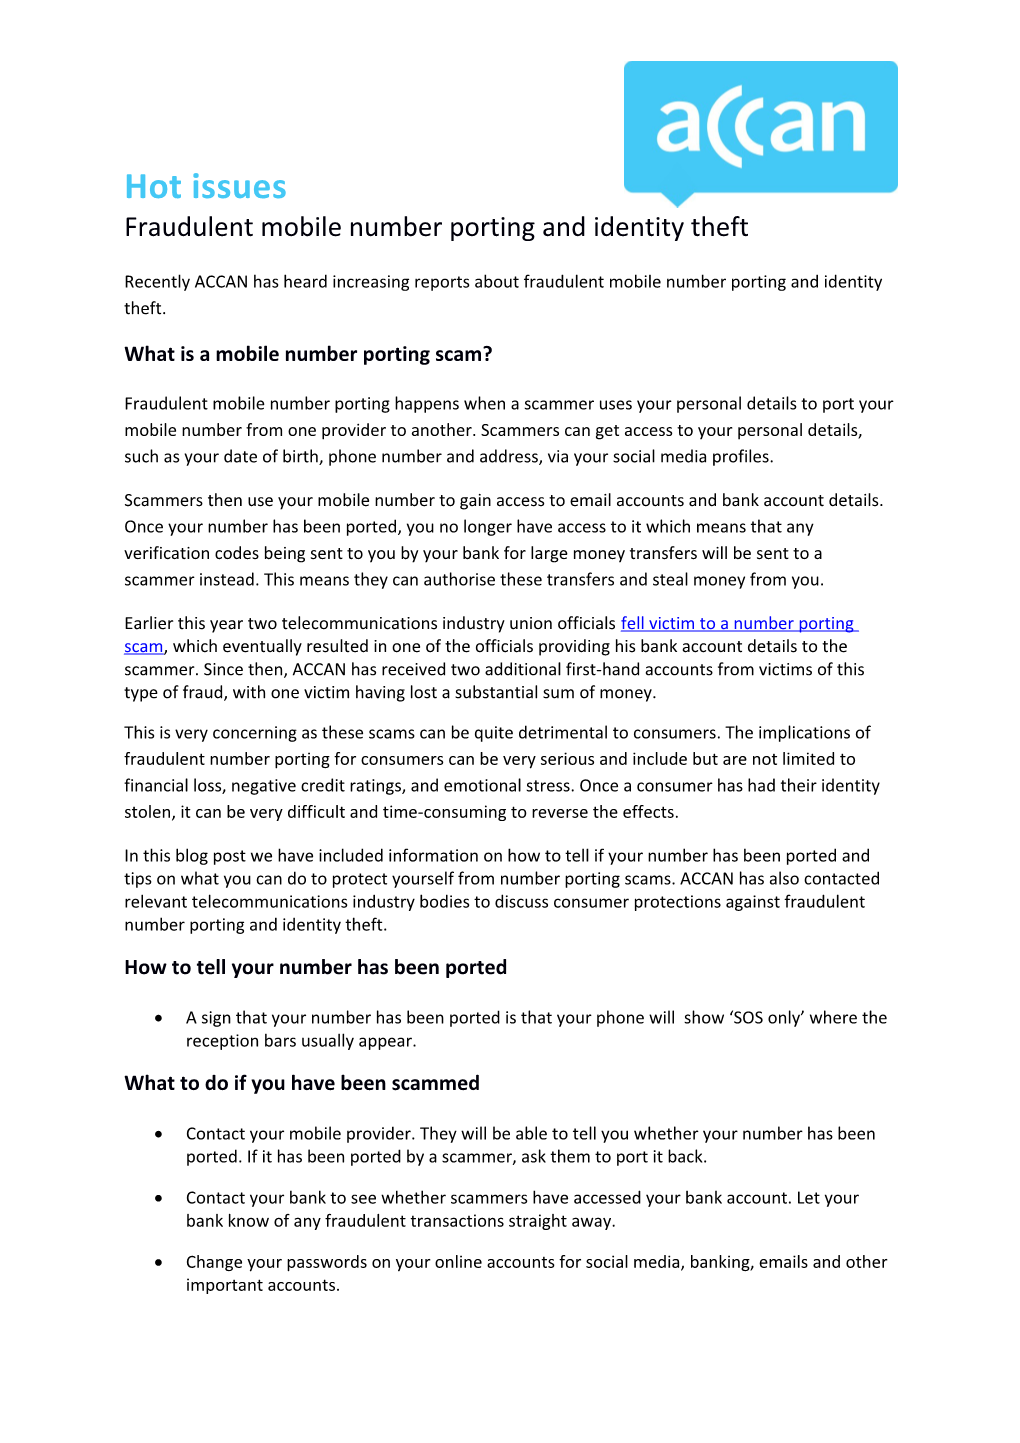 Fraudulent Mobile Number Porting and Identity Theft